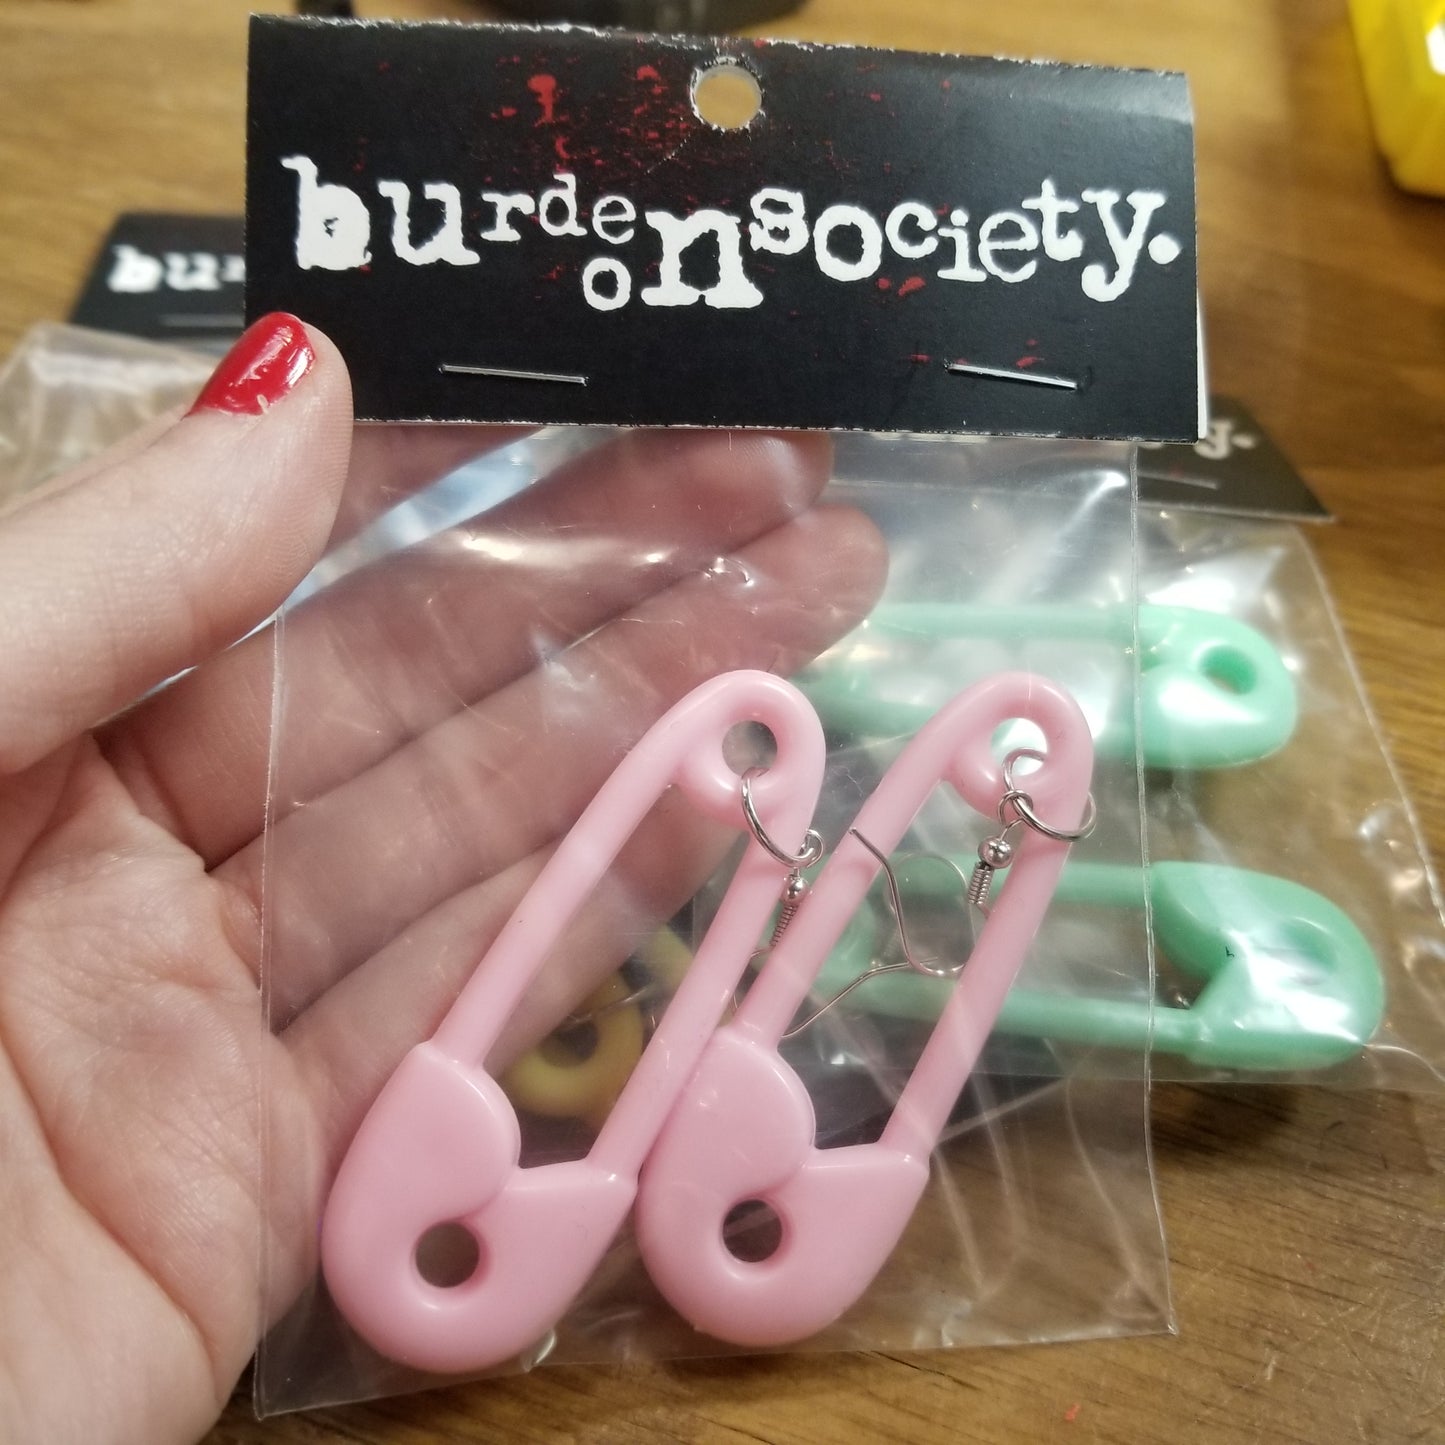 Giant Safety Pin EARRINGS by Burden on Society